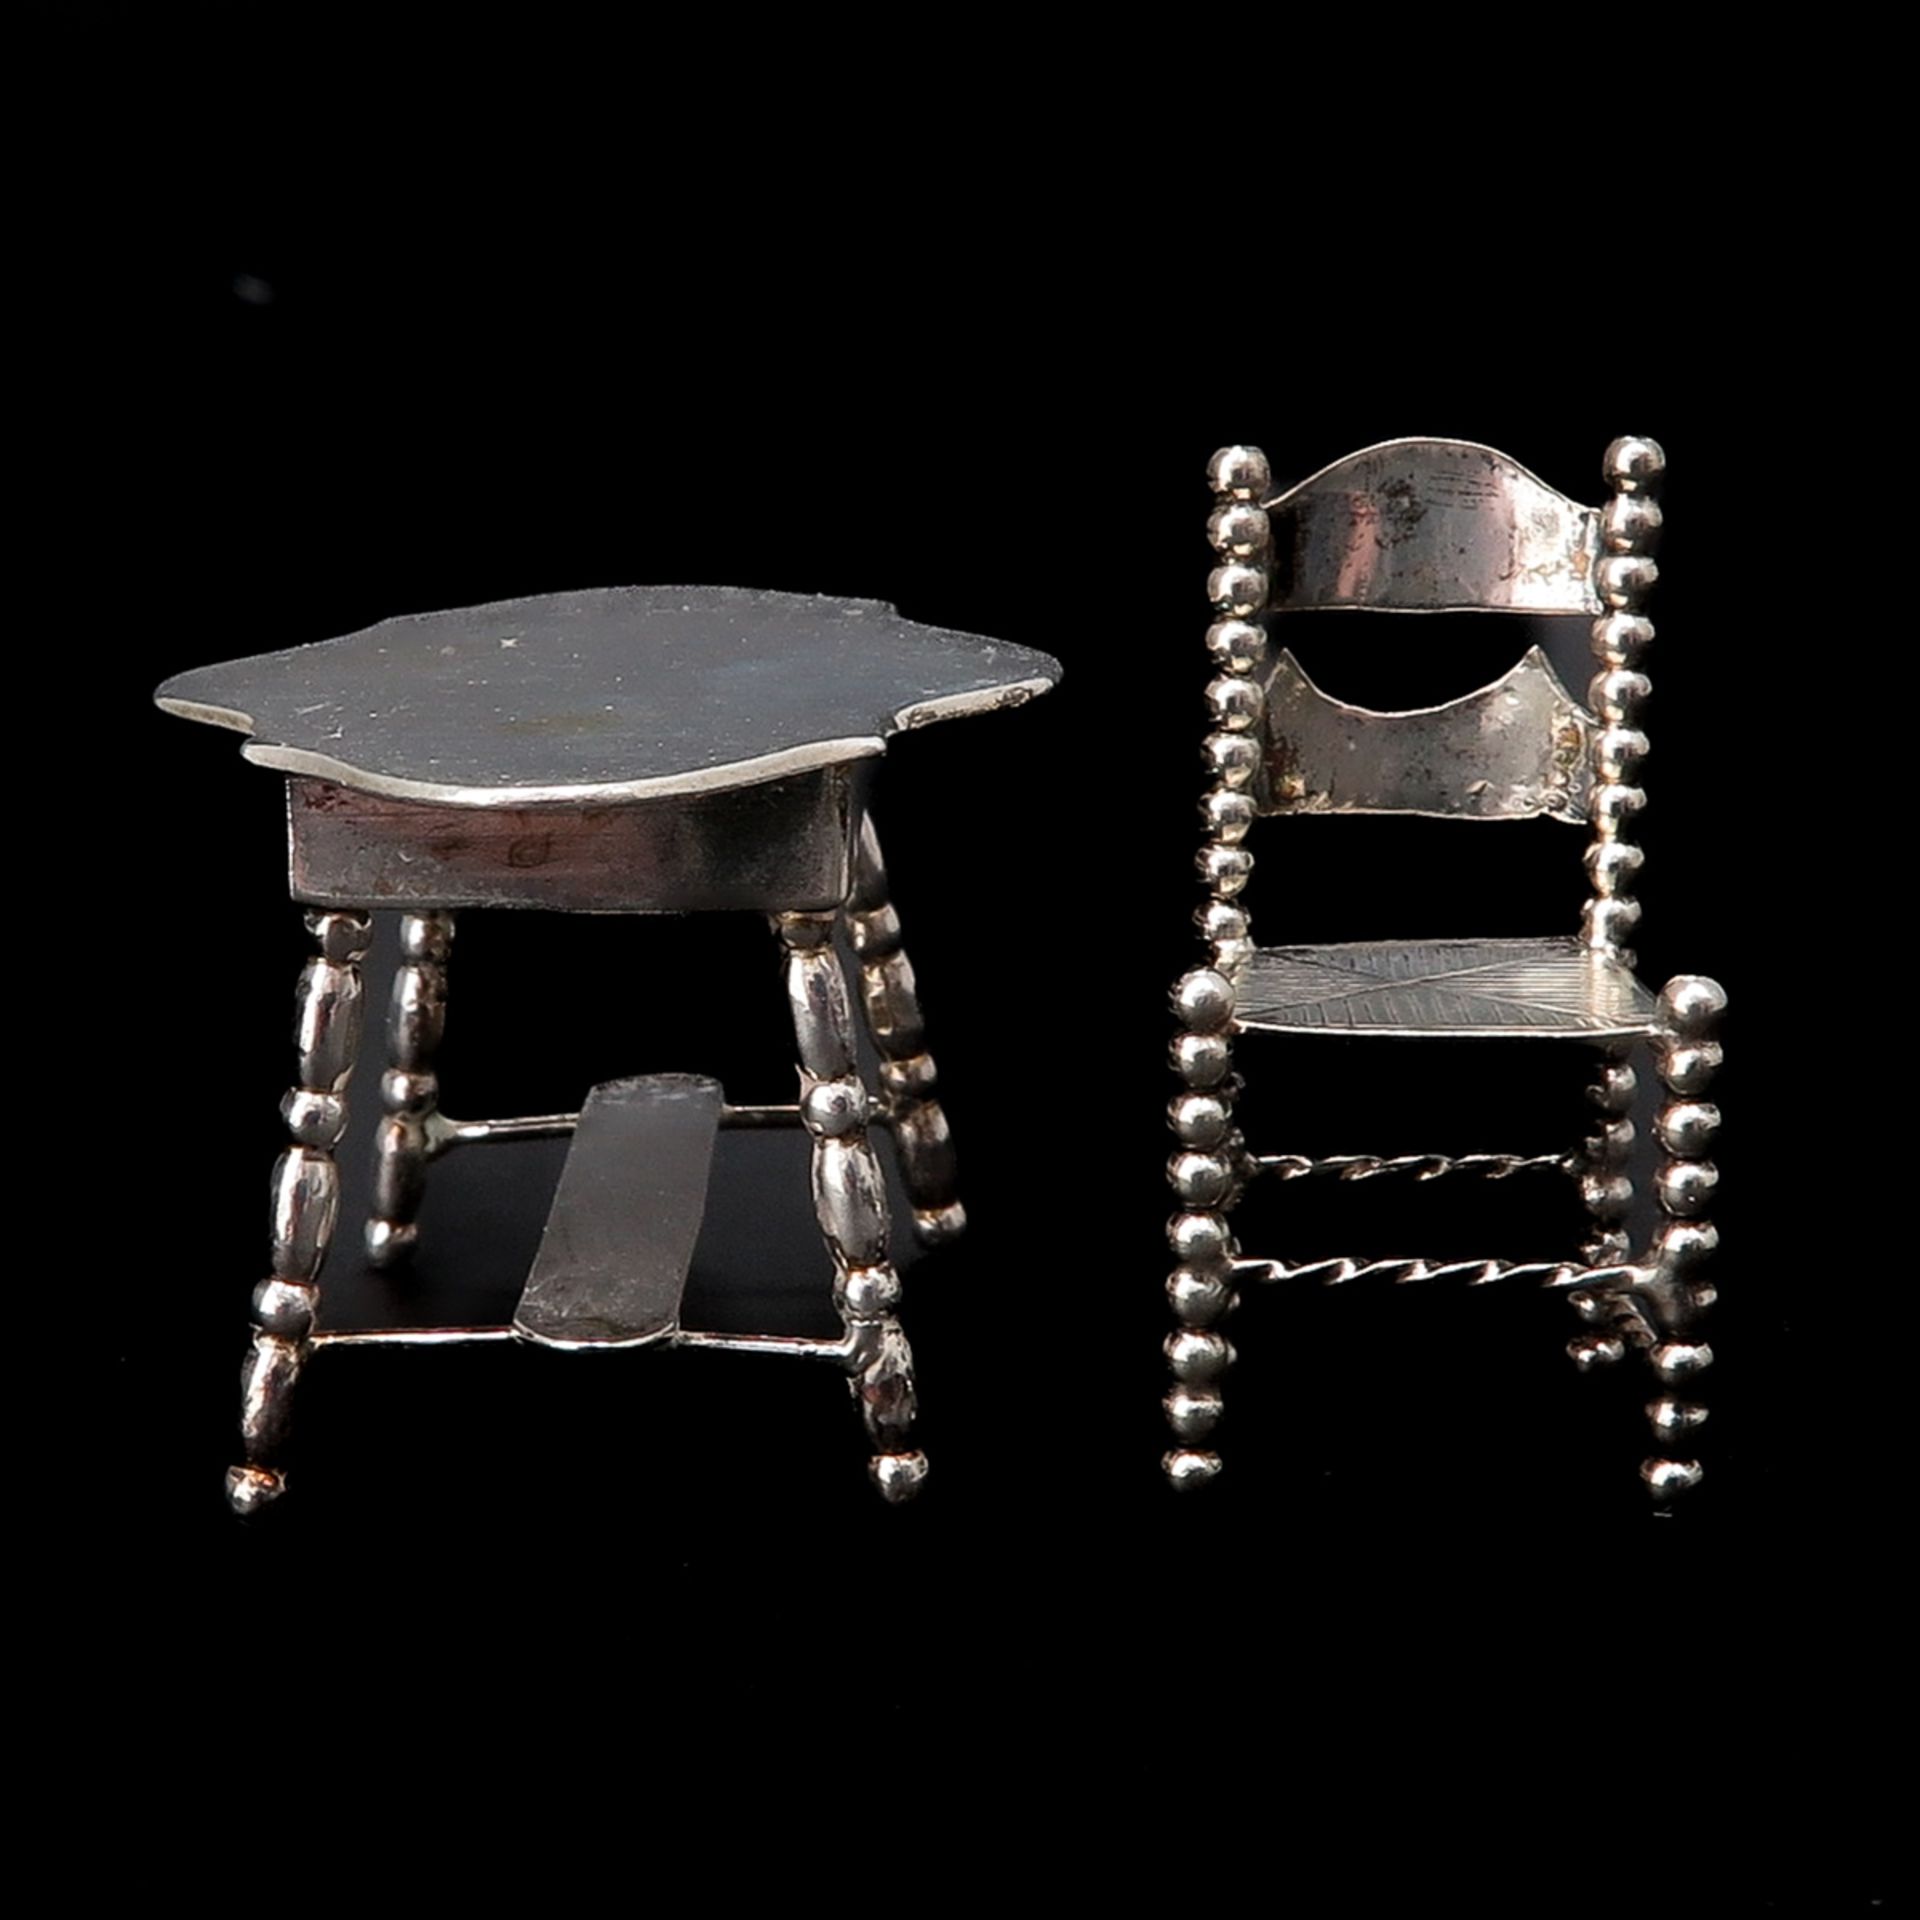 A Miniature Silver Table and Chair - Image 4 of 7